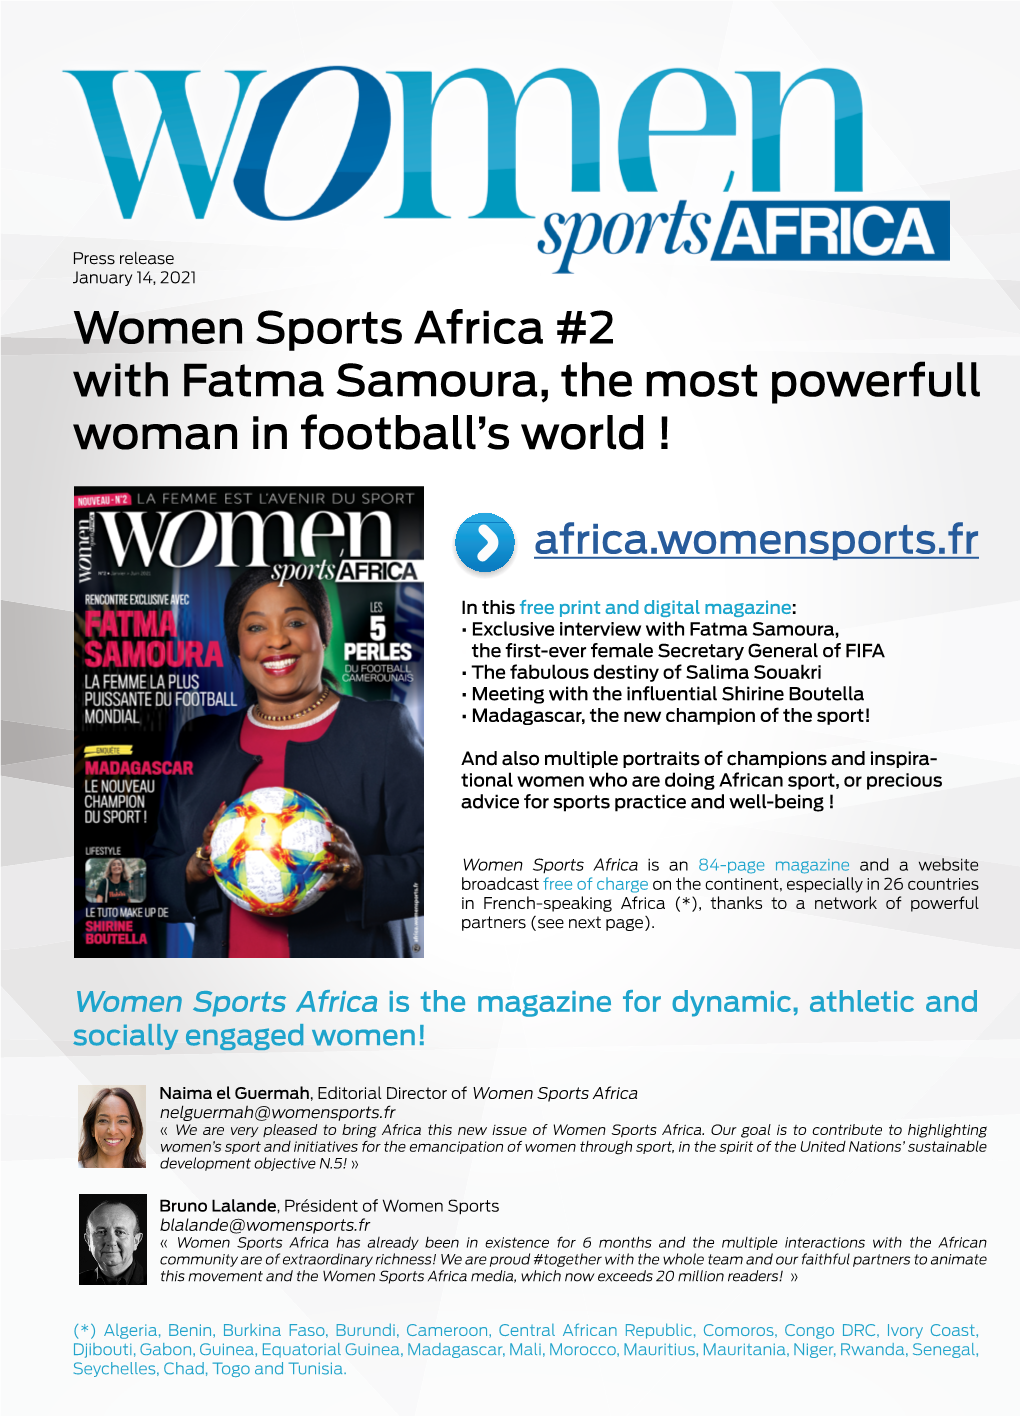 Women Sports Africa #2 with Fatma Samoura, the Most Powerfull Woman in Football's World !